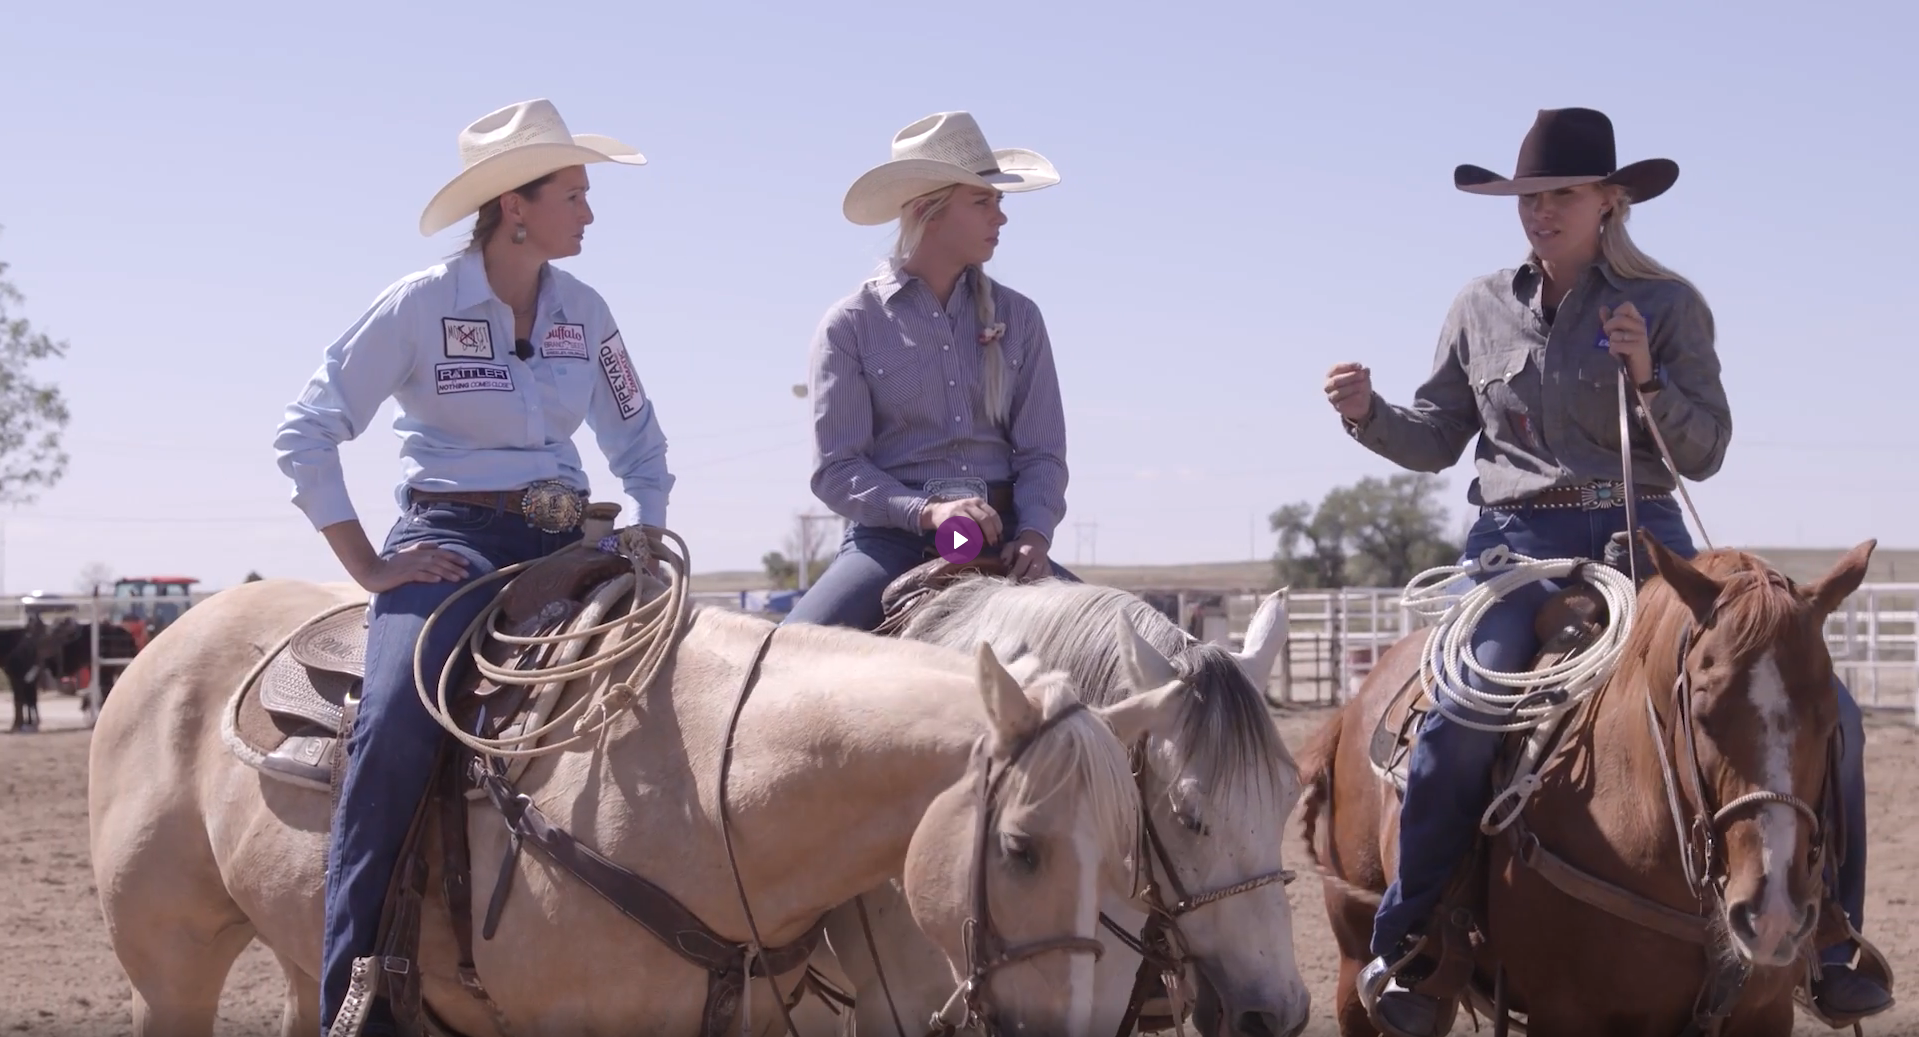 Erin Johnson And Linsay Sumpter Discuss The Trials And Tribulations From The Pro Rodeo Road.